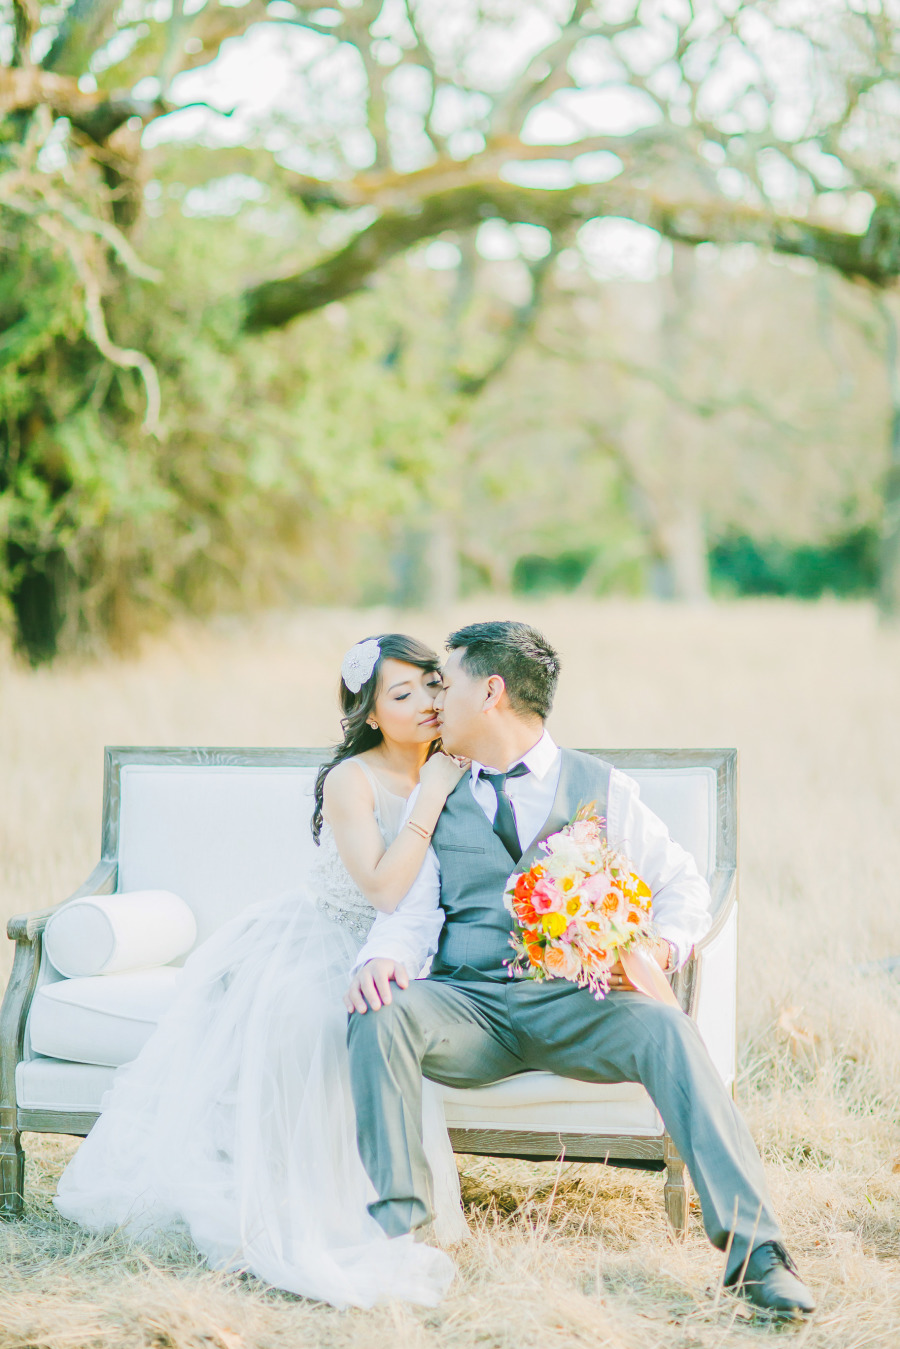 Spring Inspiration Shoot from Avec Lamour - http://www.aveclamourphotography.com/ | read more : https://www.fabmood.com/spring-inspiration-shoot-avec-lamour